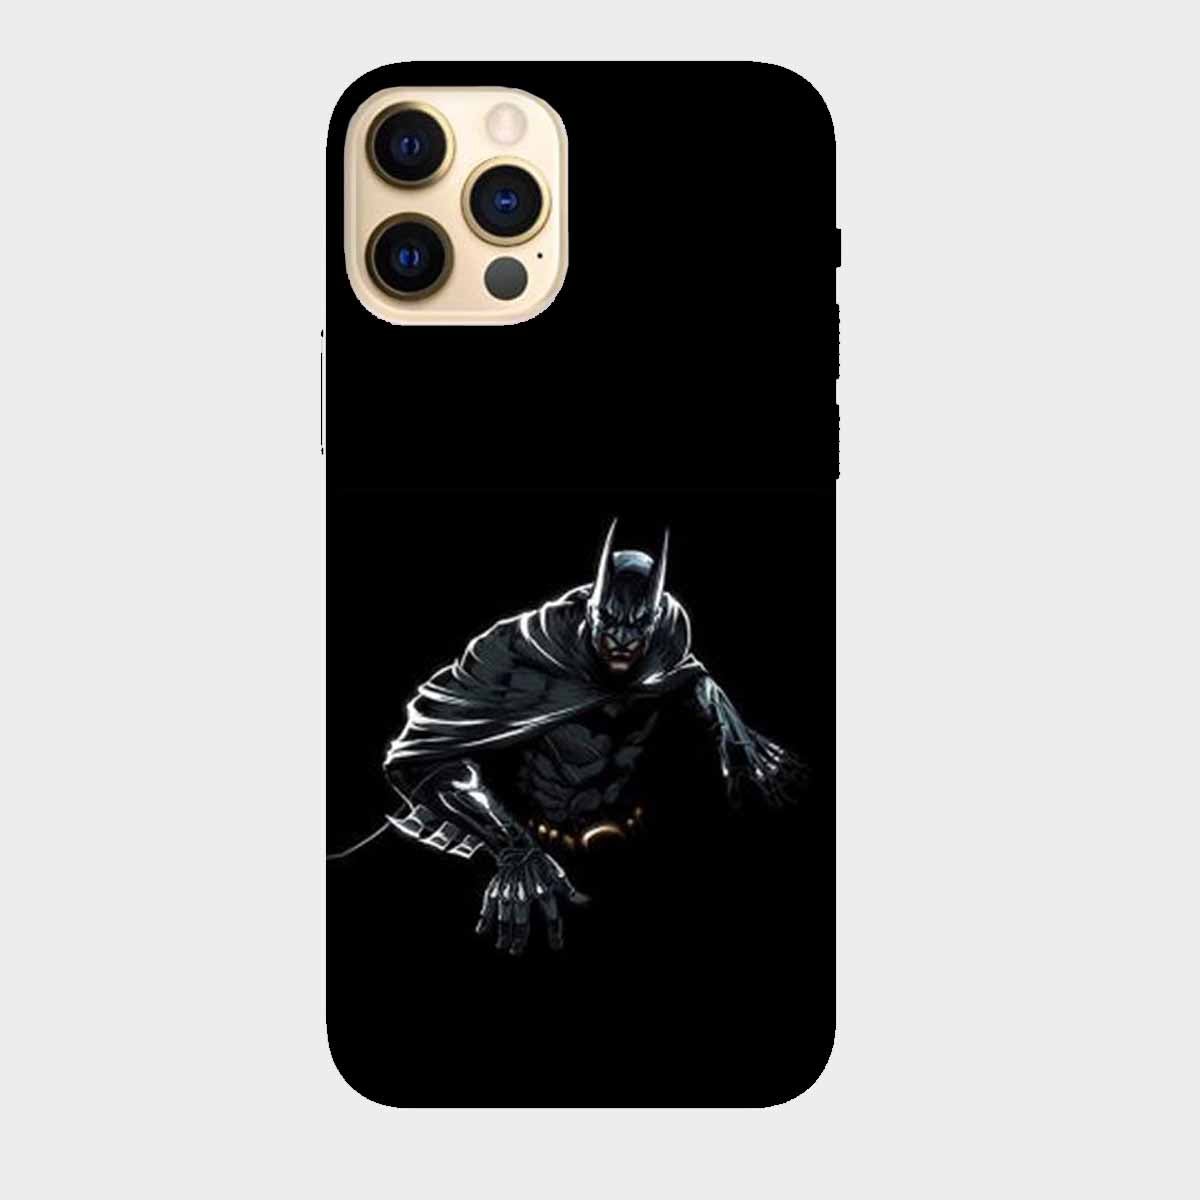 Batman - Ready for Action - Mobile Phone Cover - Hard Case